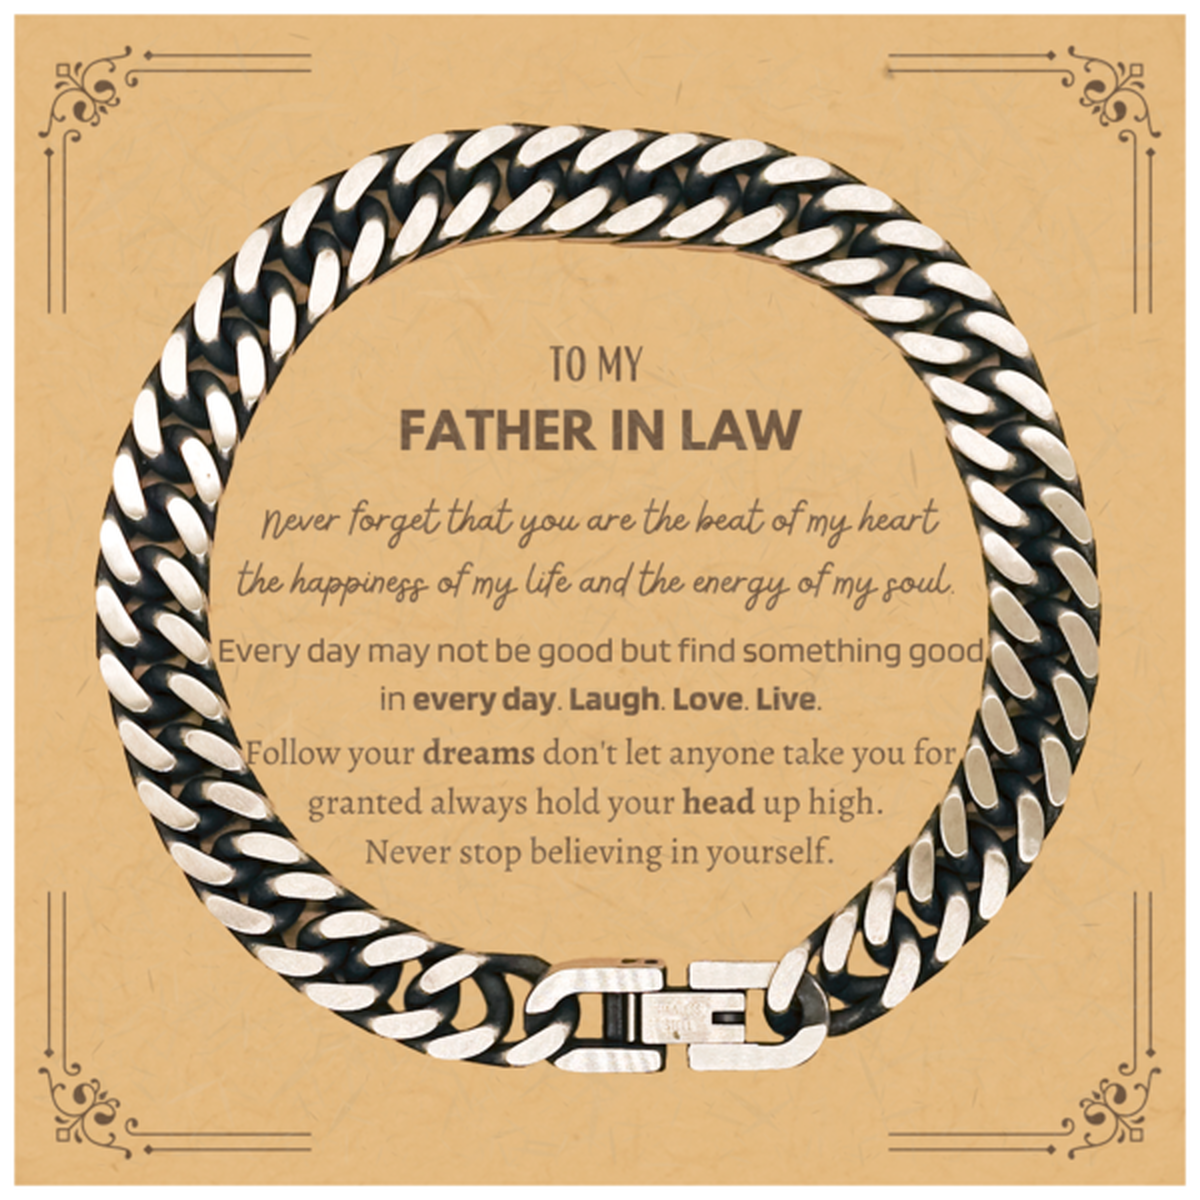 To My Father In Law Message Card Gifts, Christmas Father In Law Cuban Link Chain Bracelet Present, Birthday Unique Motivational For Father In Law, To My Father In Law Never forget that you are the beat of my heart the happiness of my life and the energy o